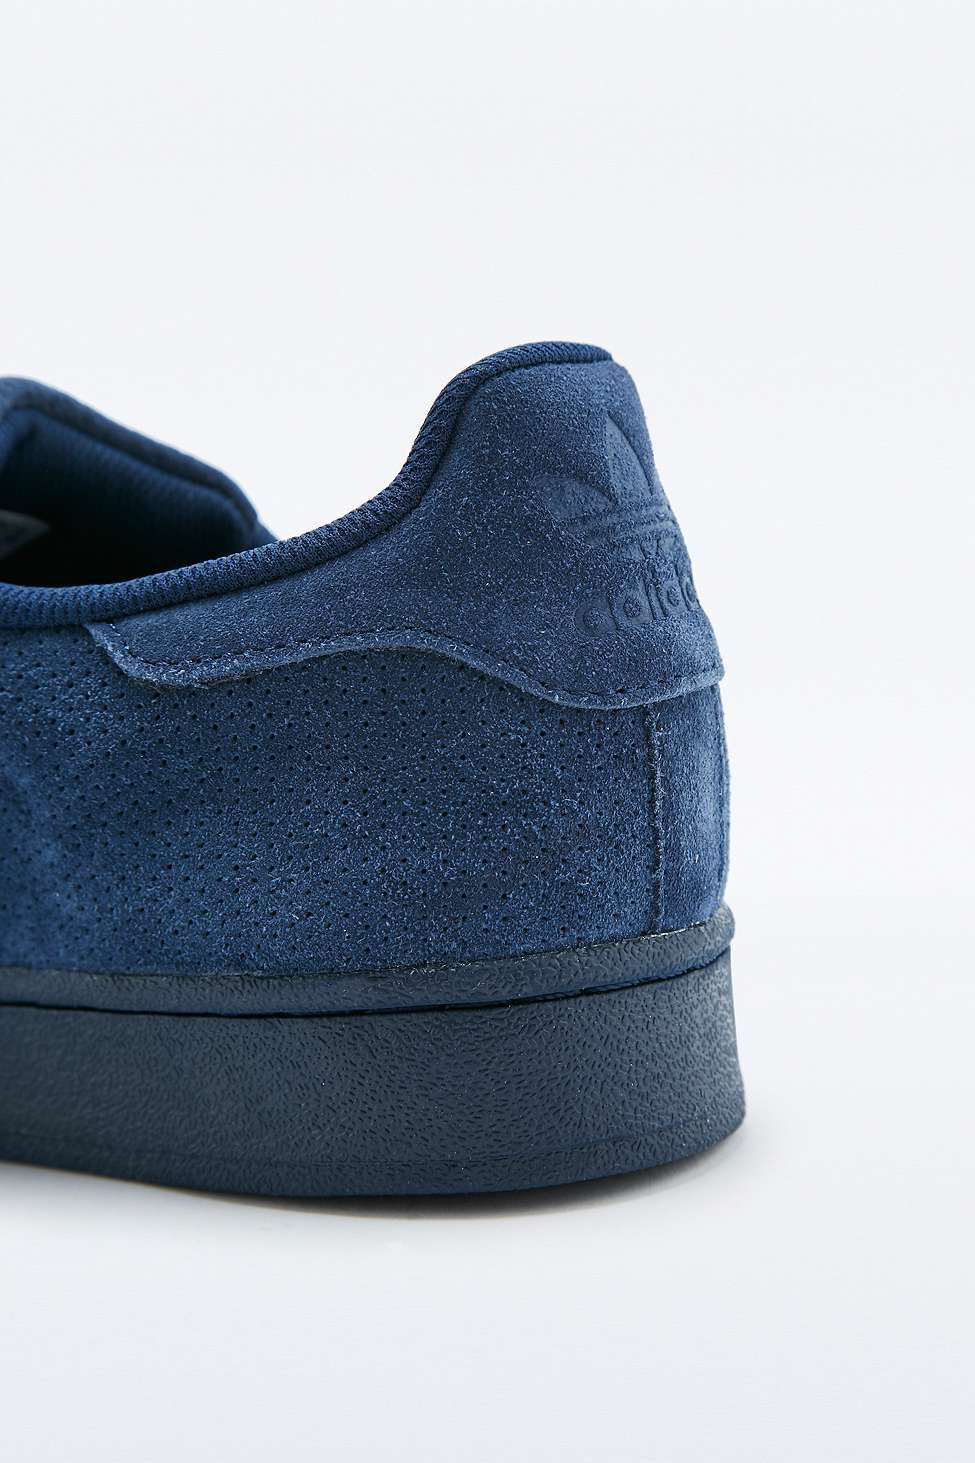 adidas blue suede trainers